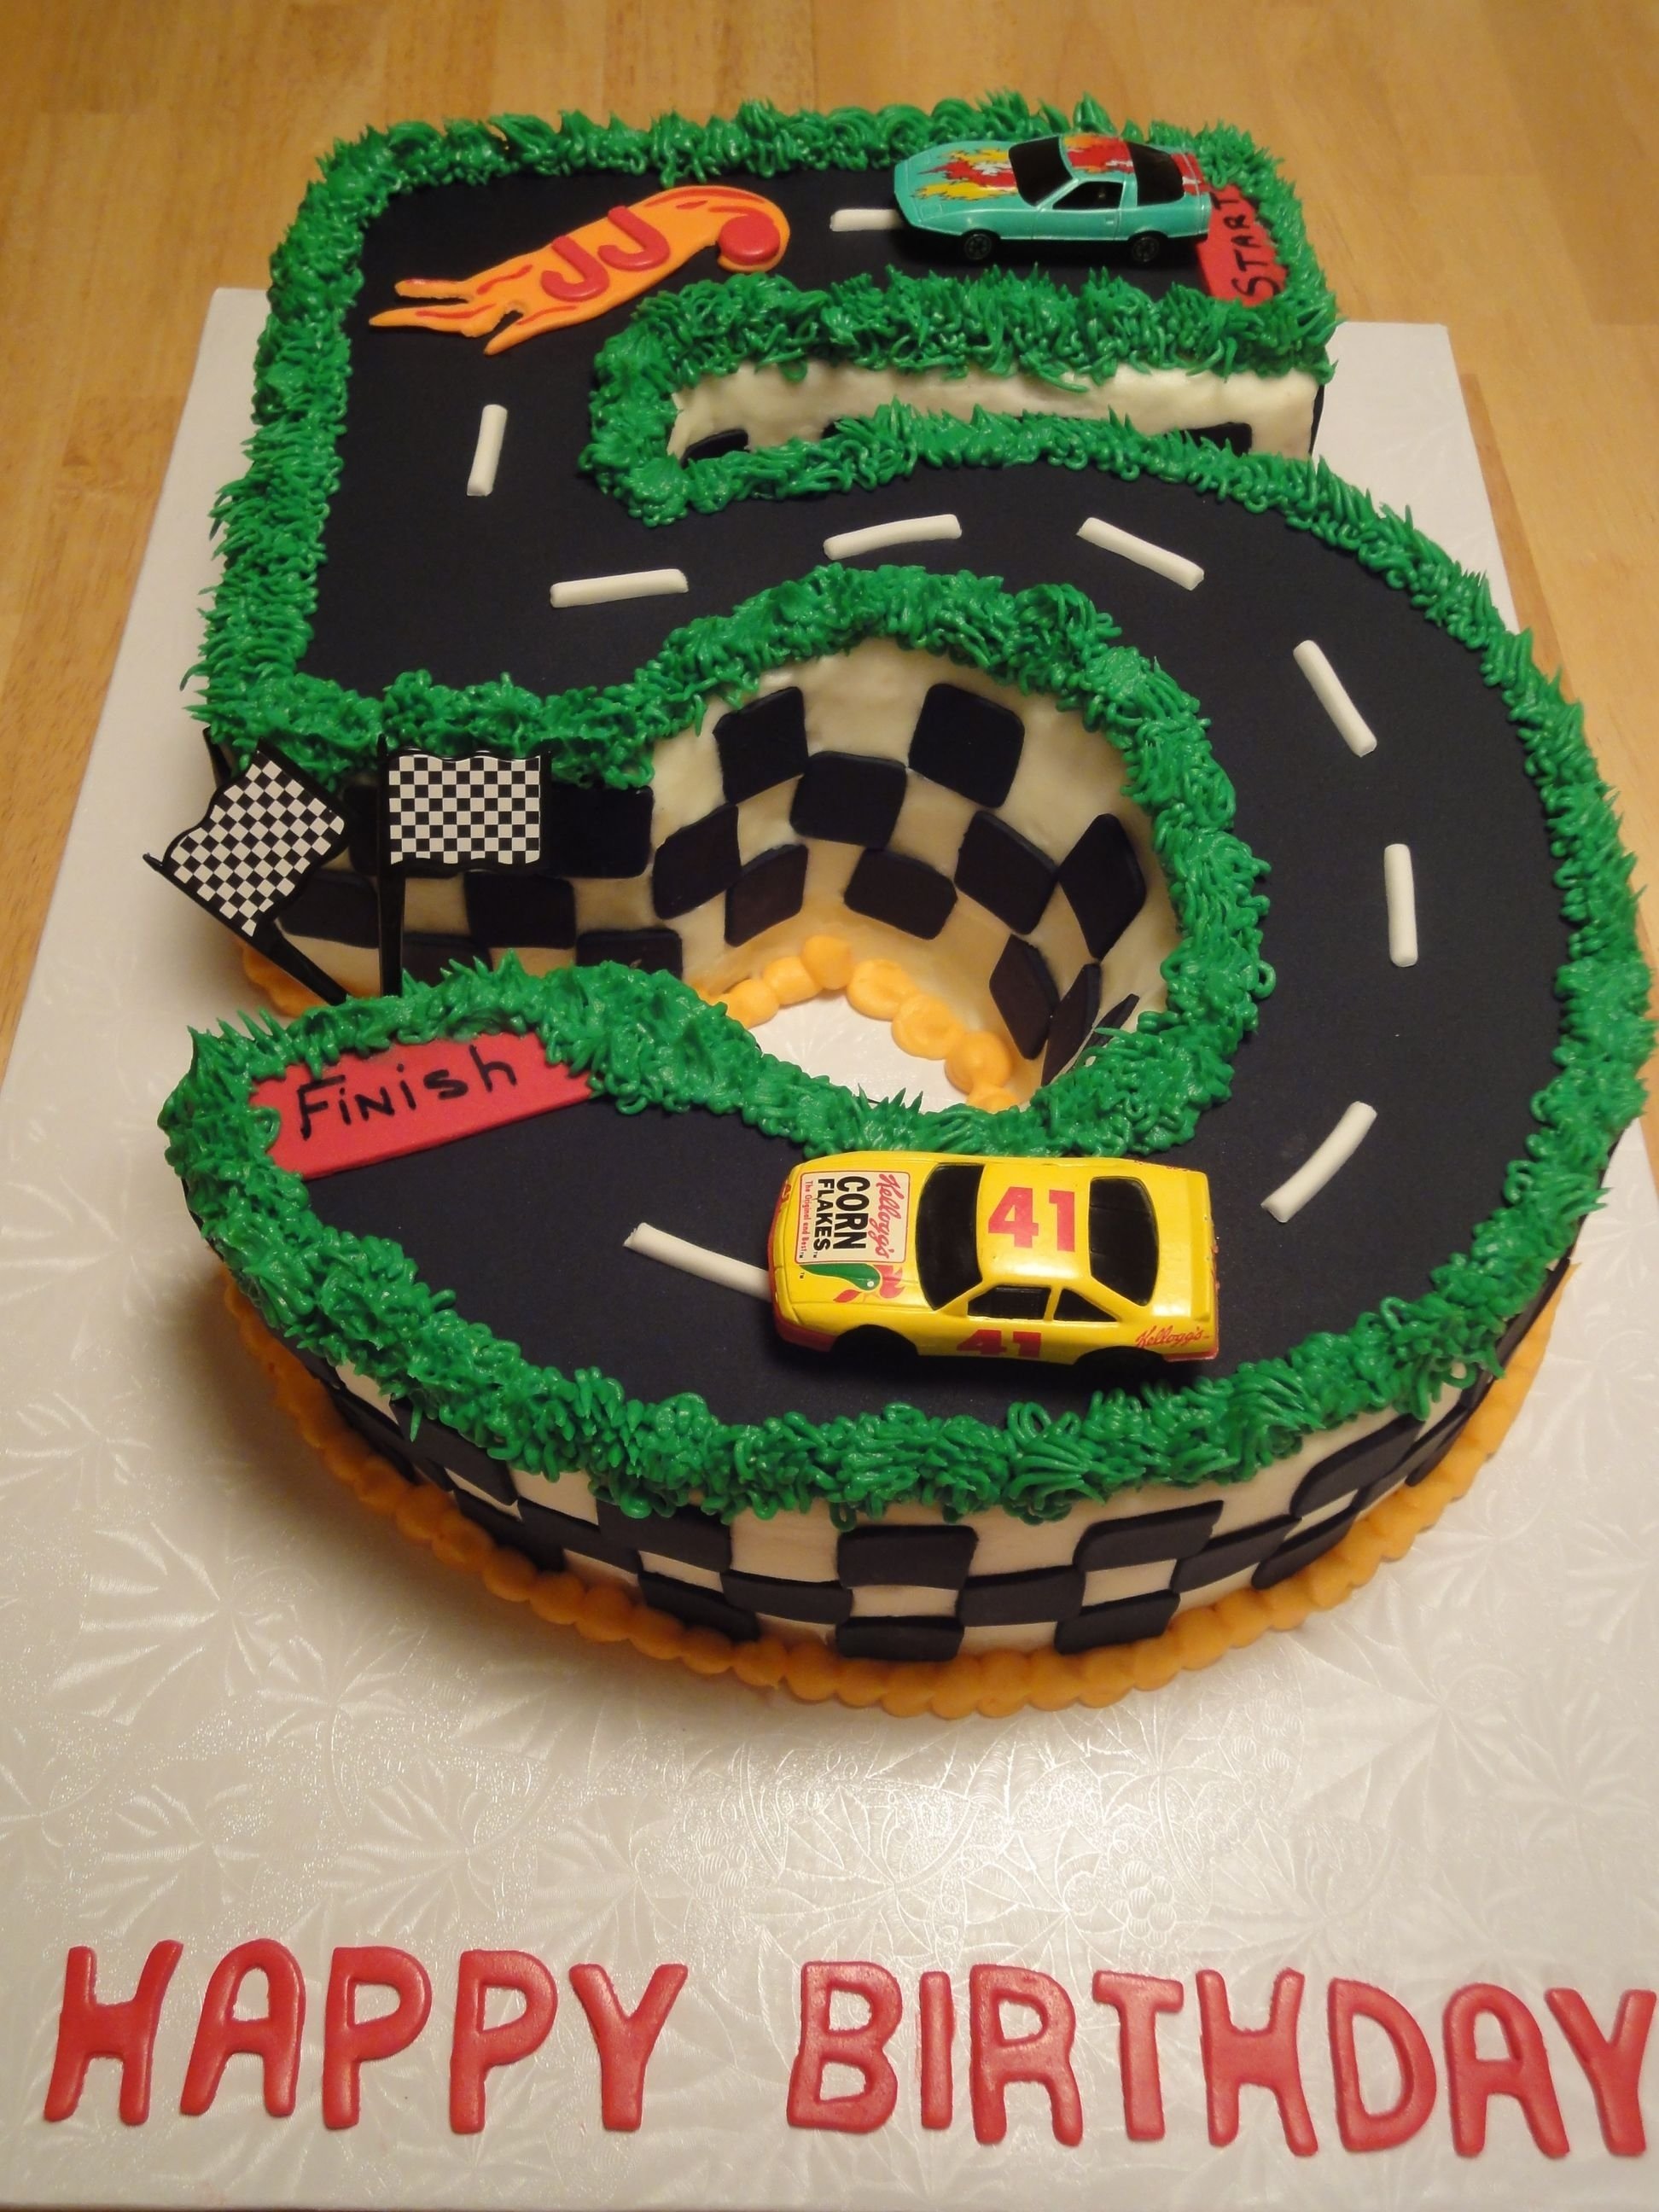 10 Awesome Birthday Ideas For A 5 Year Old Boy happy birthday to a 5 year old boy hot wheels cake janies sweet 2023